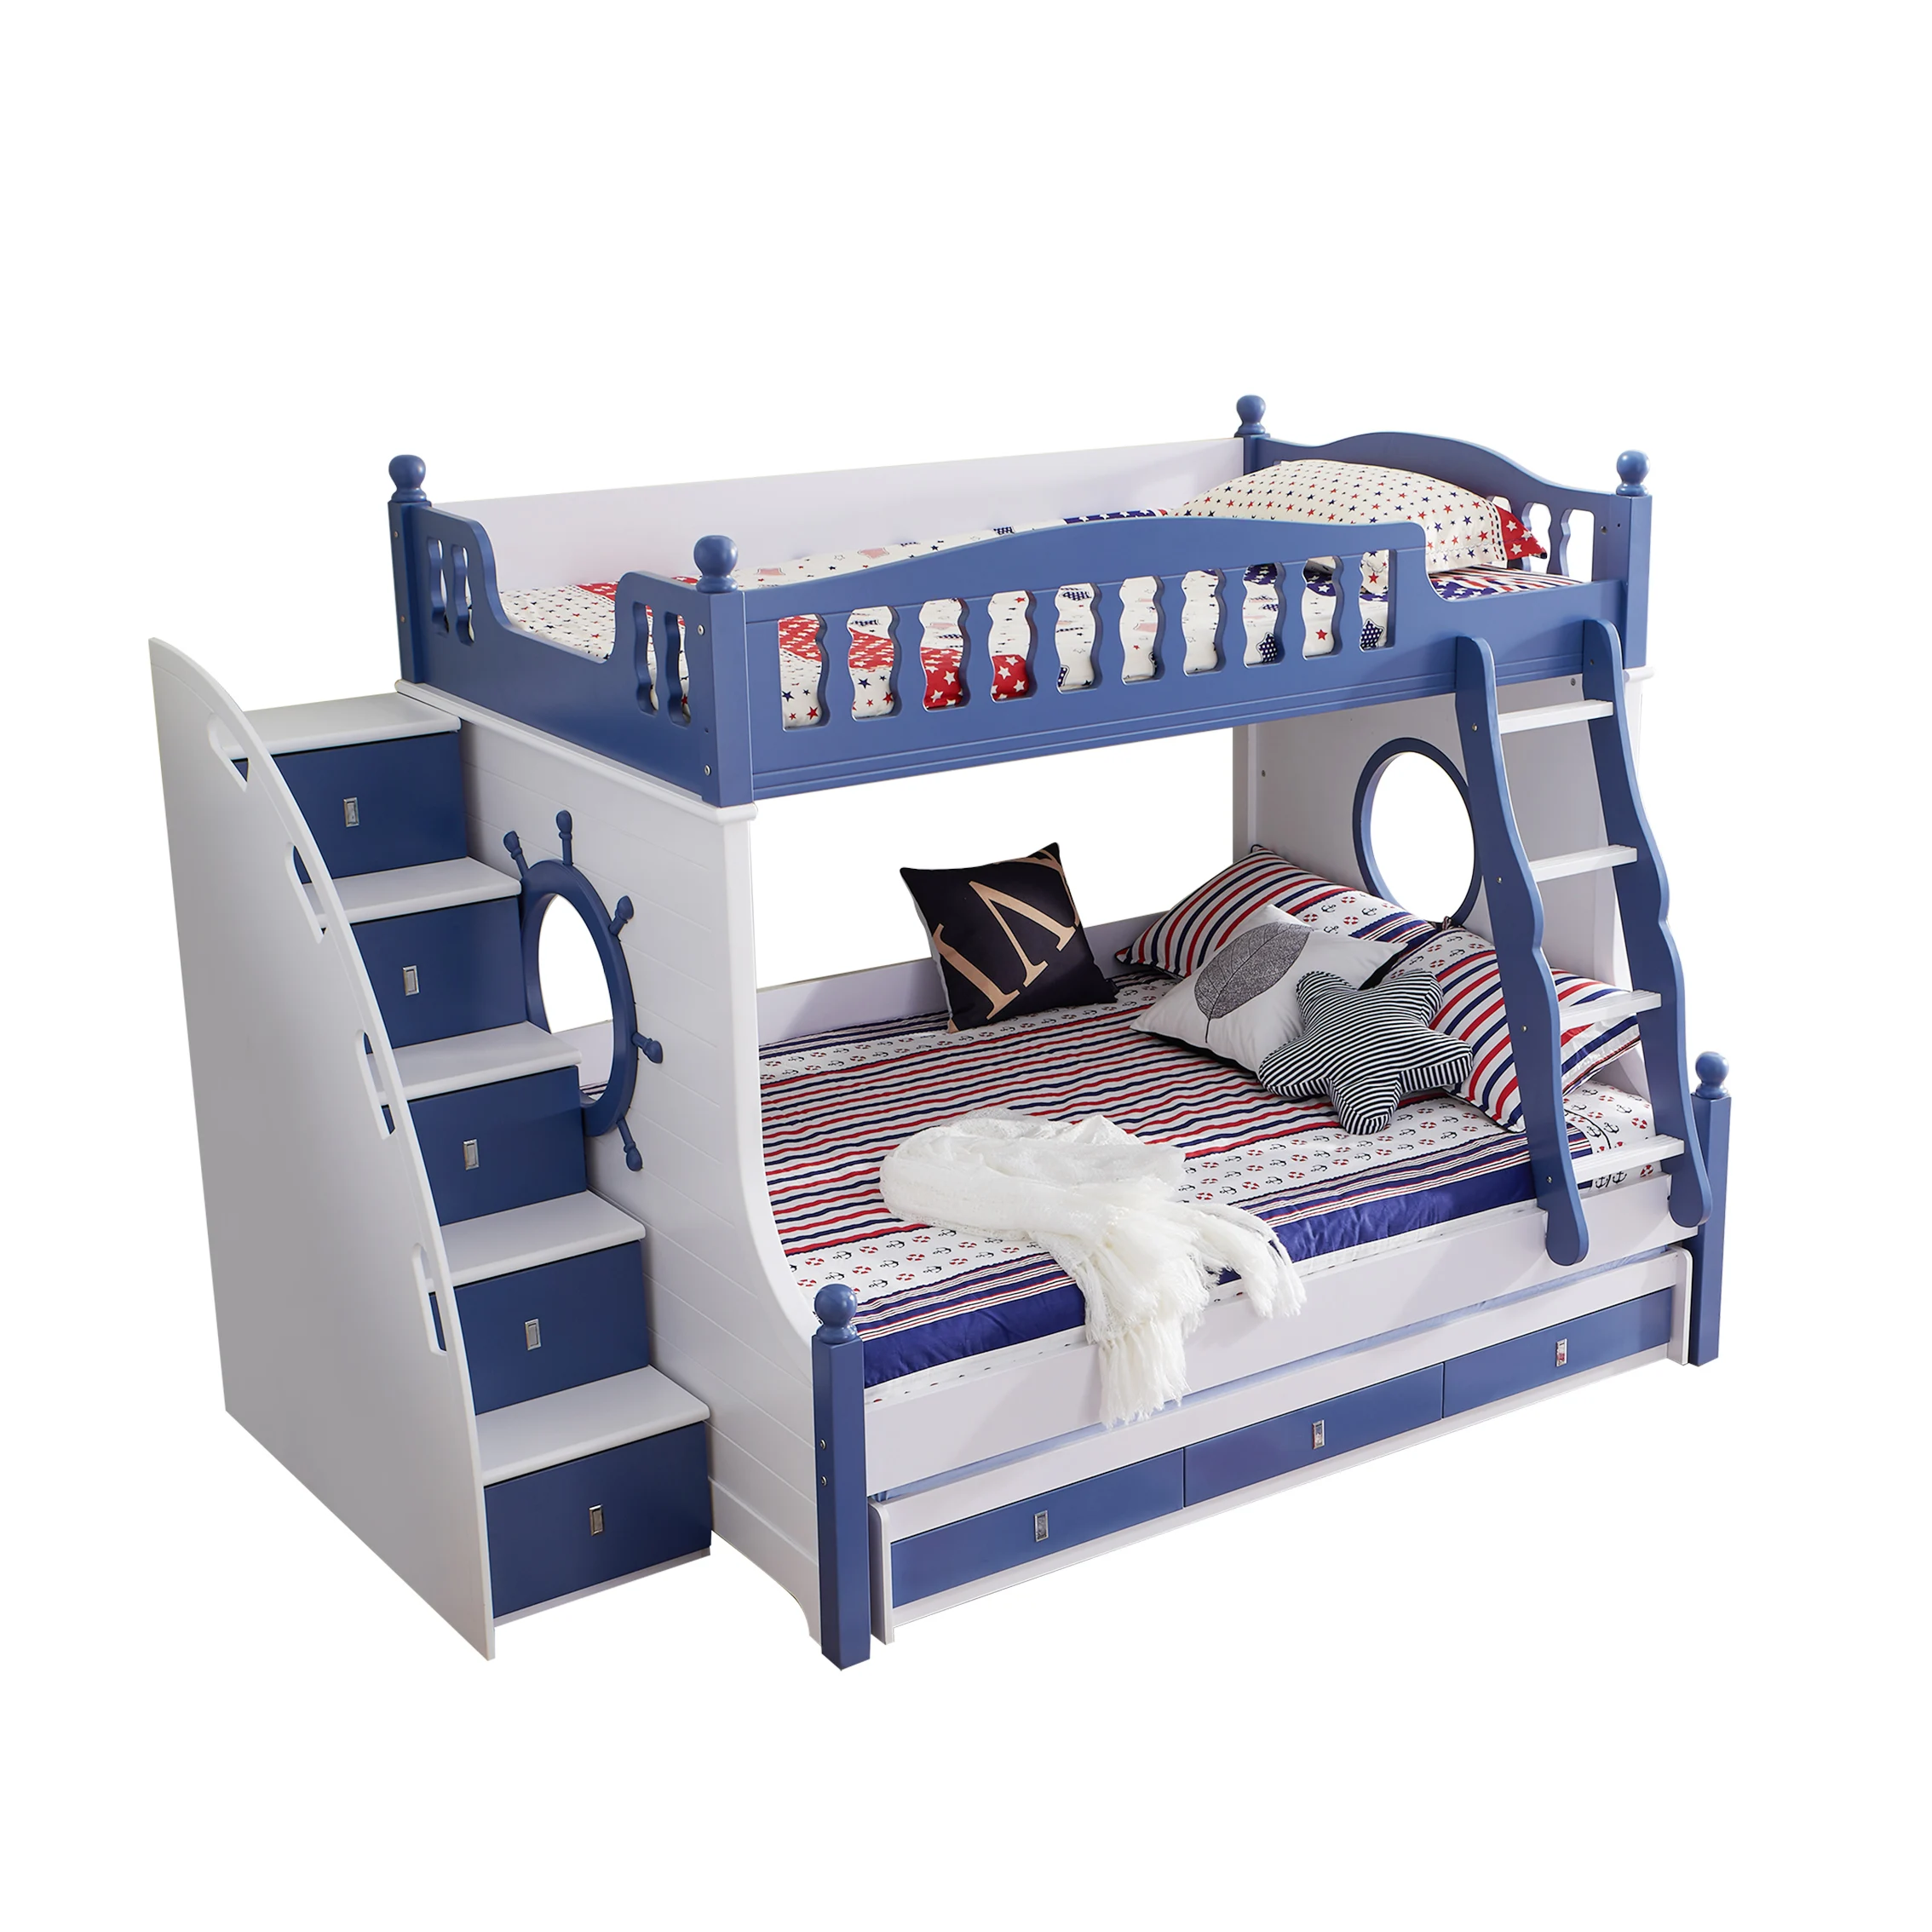 double deck bed